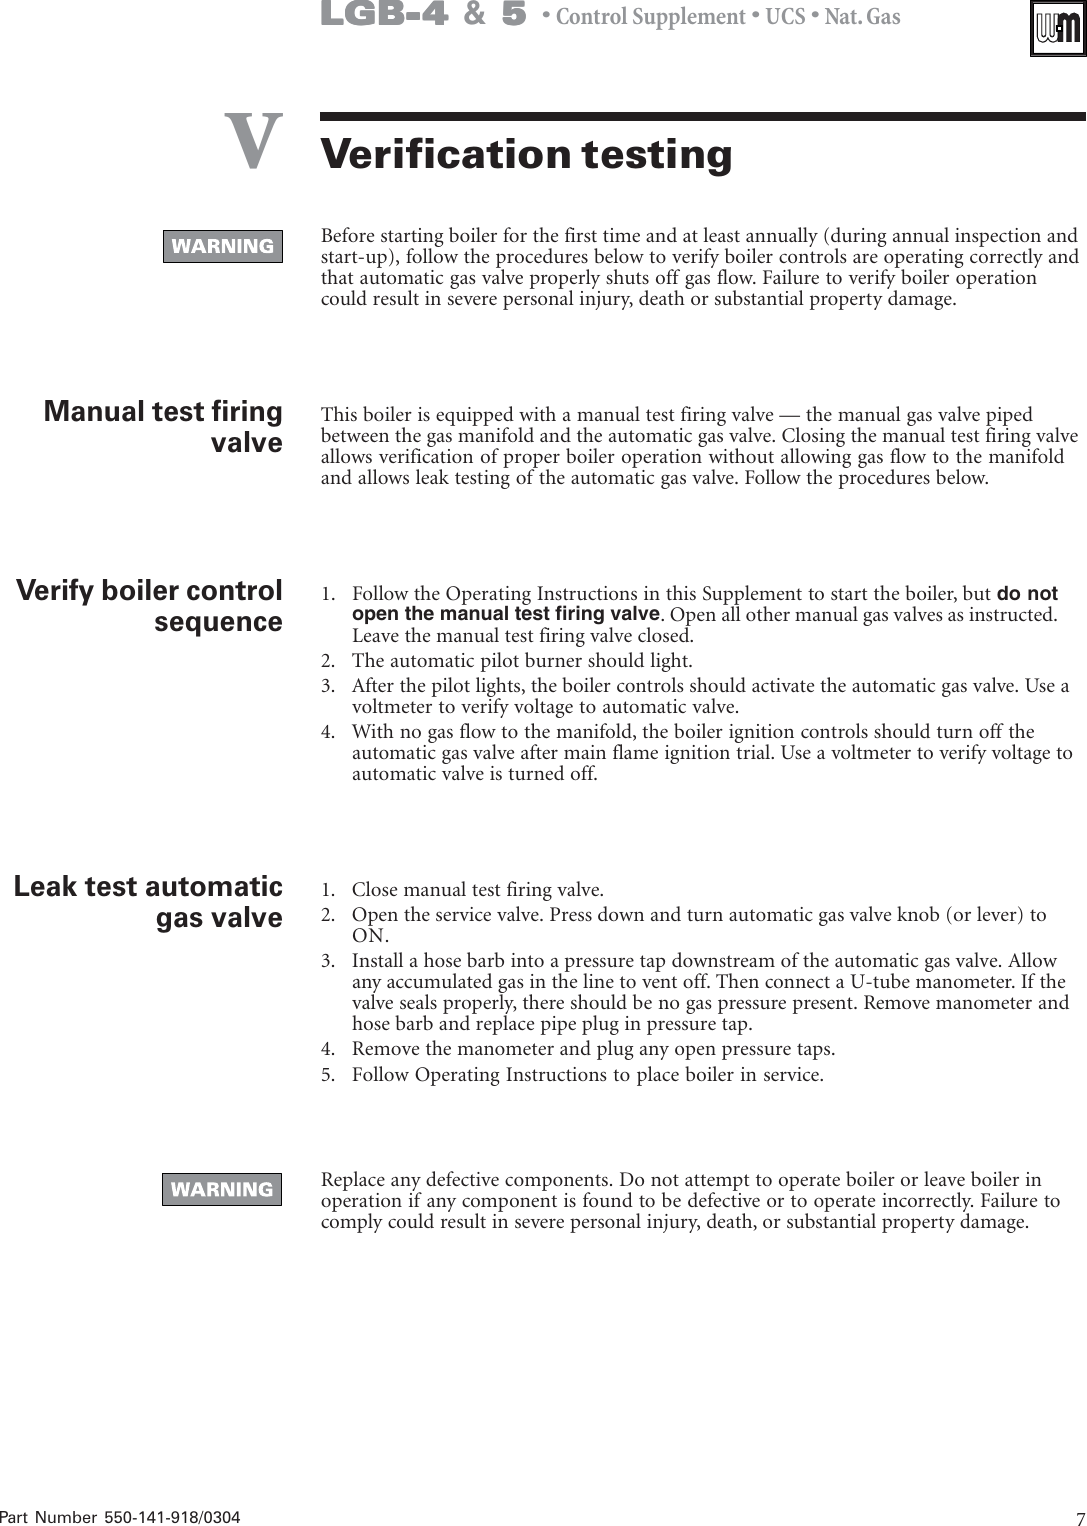 Page 7 of 8 - Weil-Mclain Weil-Mclain-Lgb-4-Users-Manual- 550-141-918_0304.pmd  Weil-mclain-lgb-4-users-manual